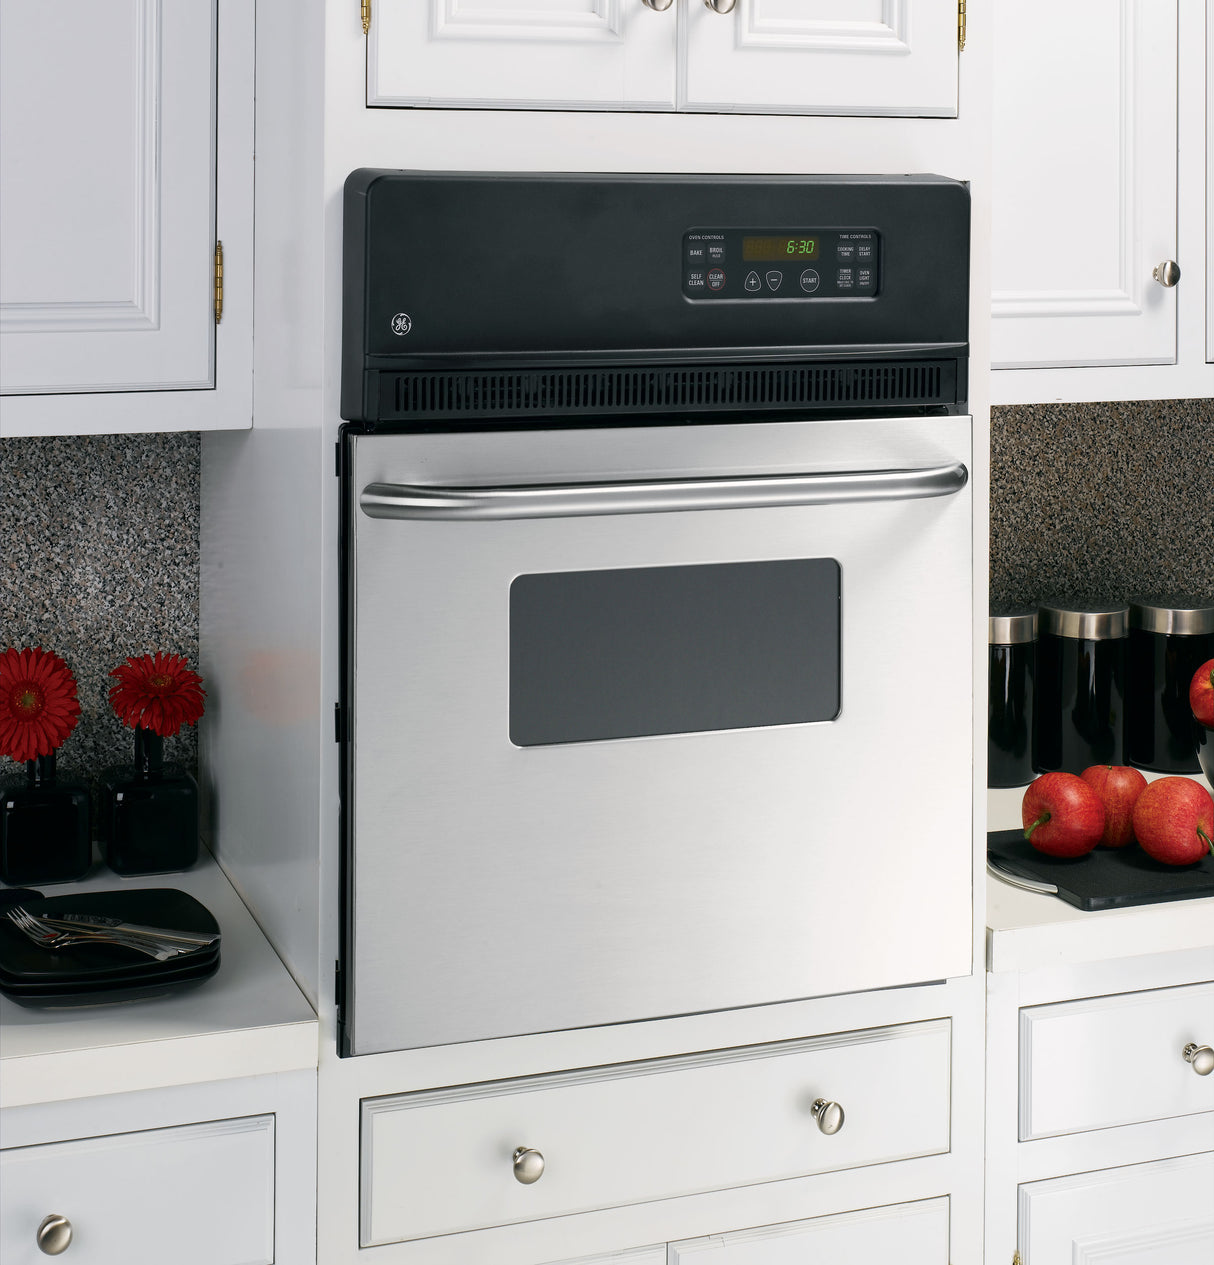 GE(R) 24" Electric Single Self-Cleaning Wall Oven - (JRP20SKSS)